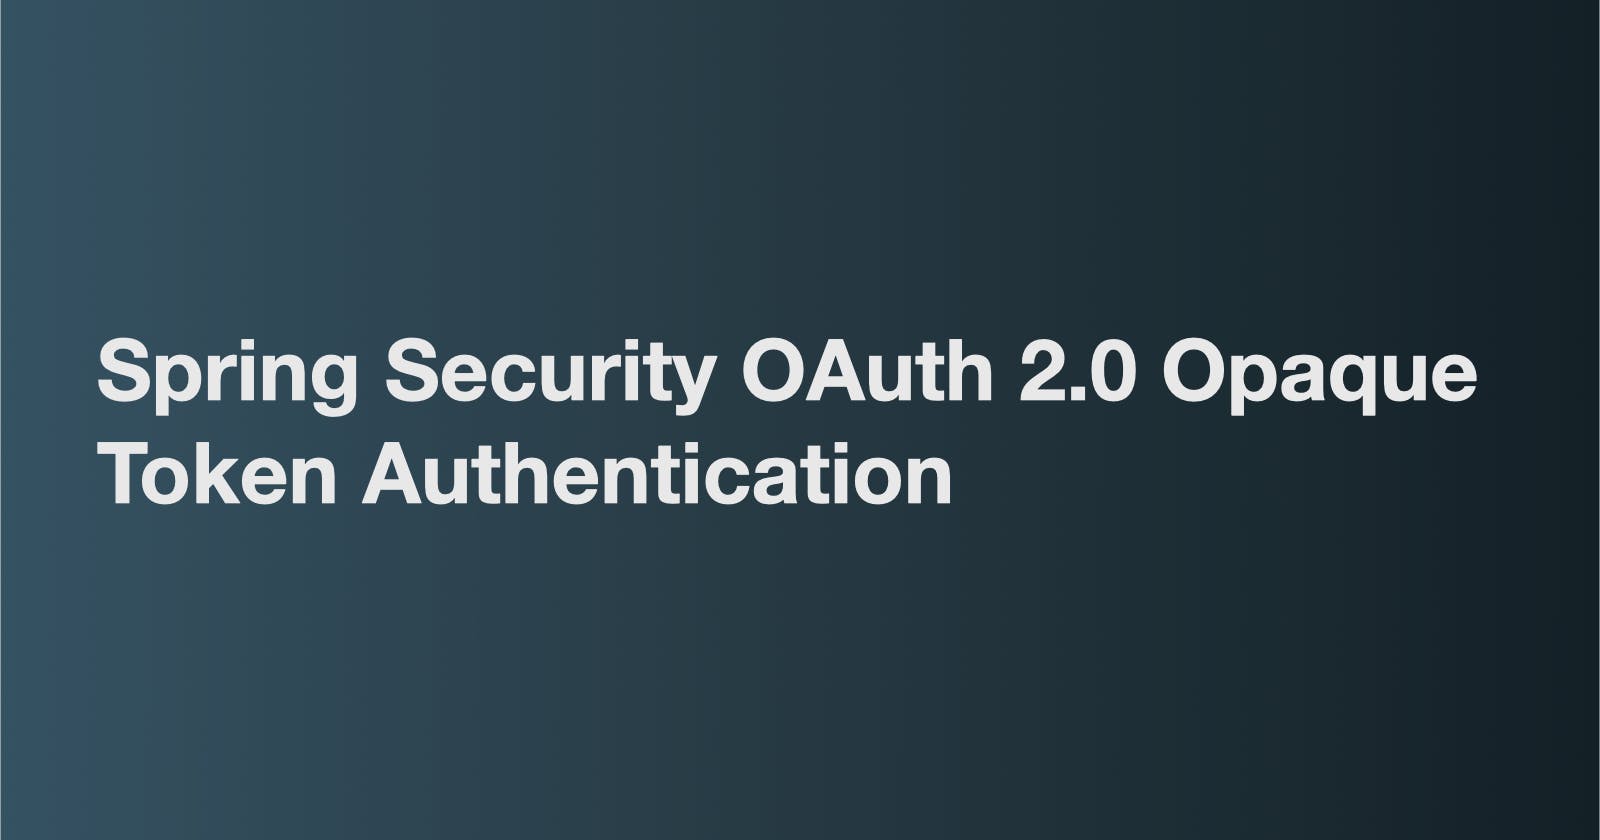 Spring Security OAuth 2.0 Opaque Token Authentication